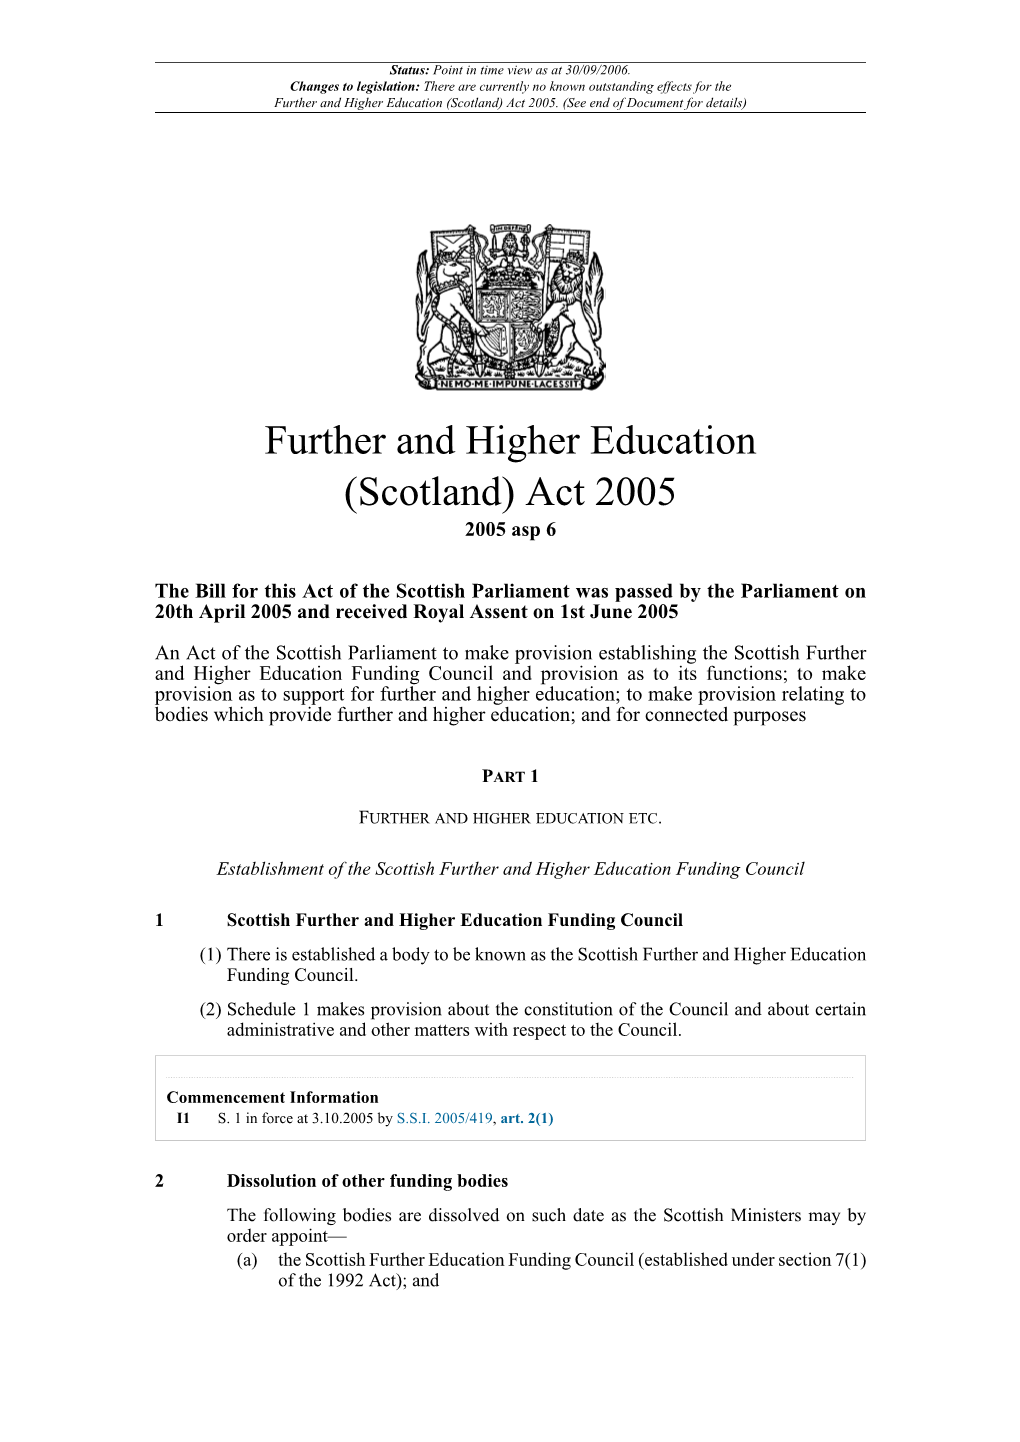 Further and Higher Education (Scotland) Act 2005